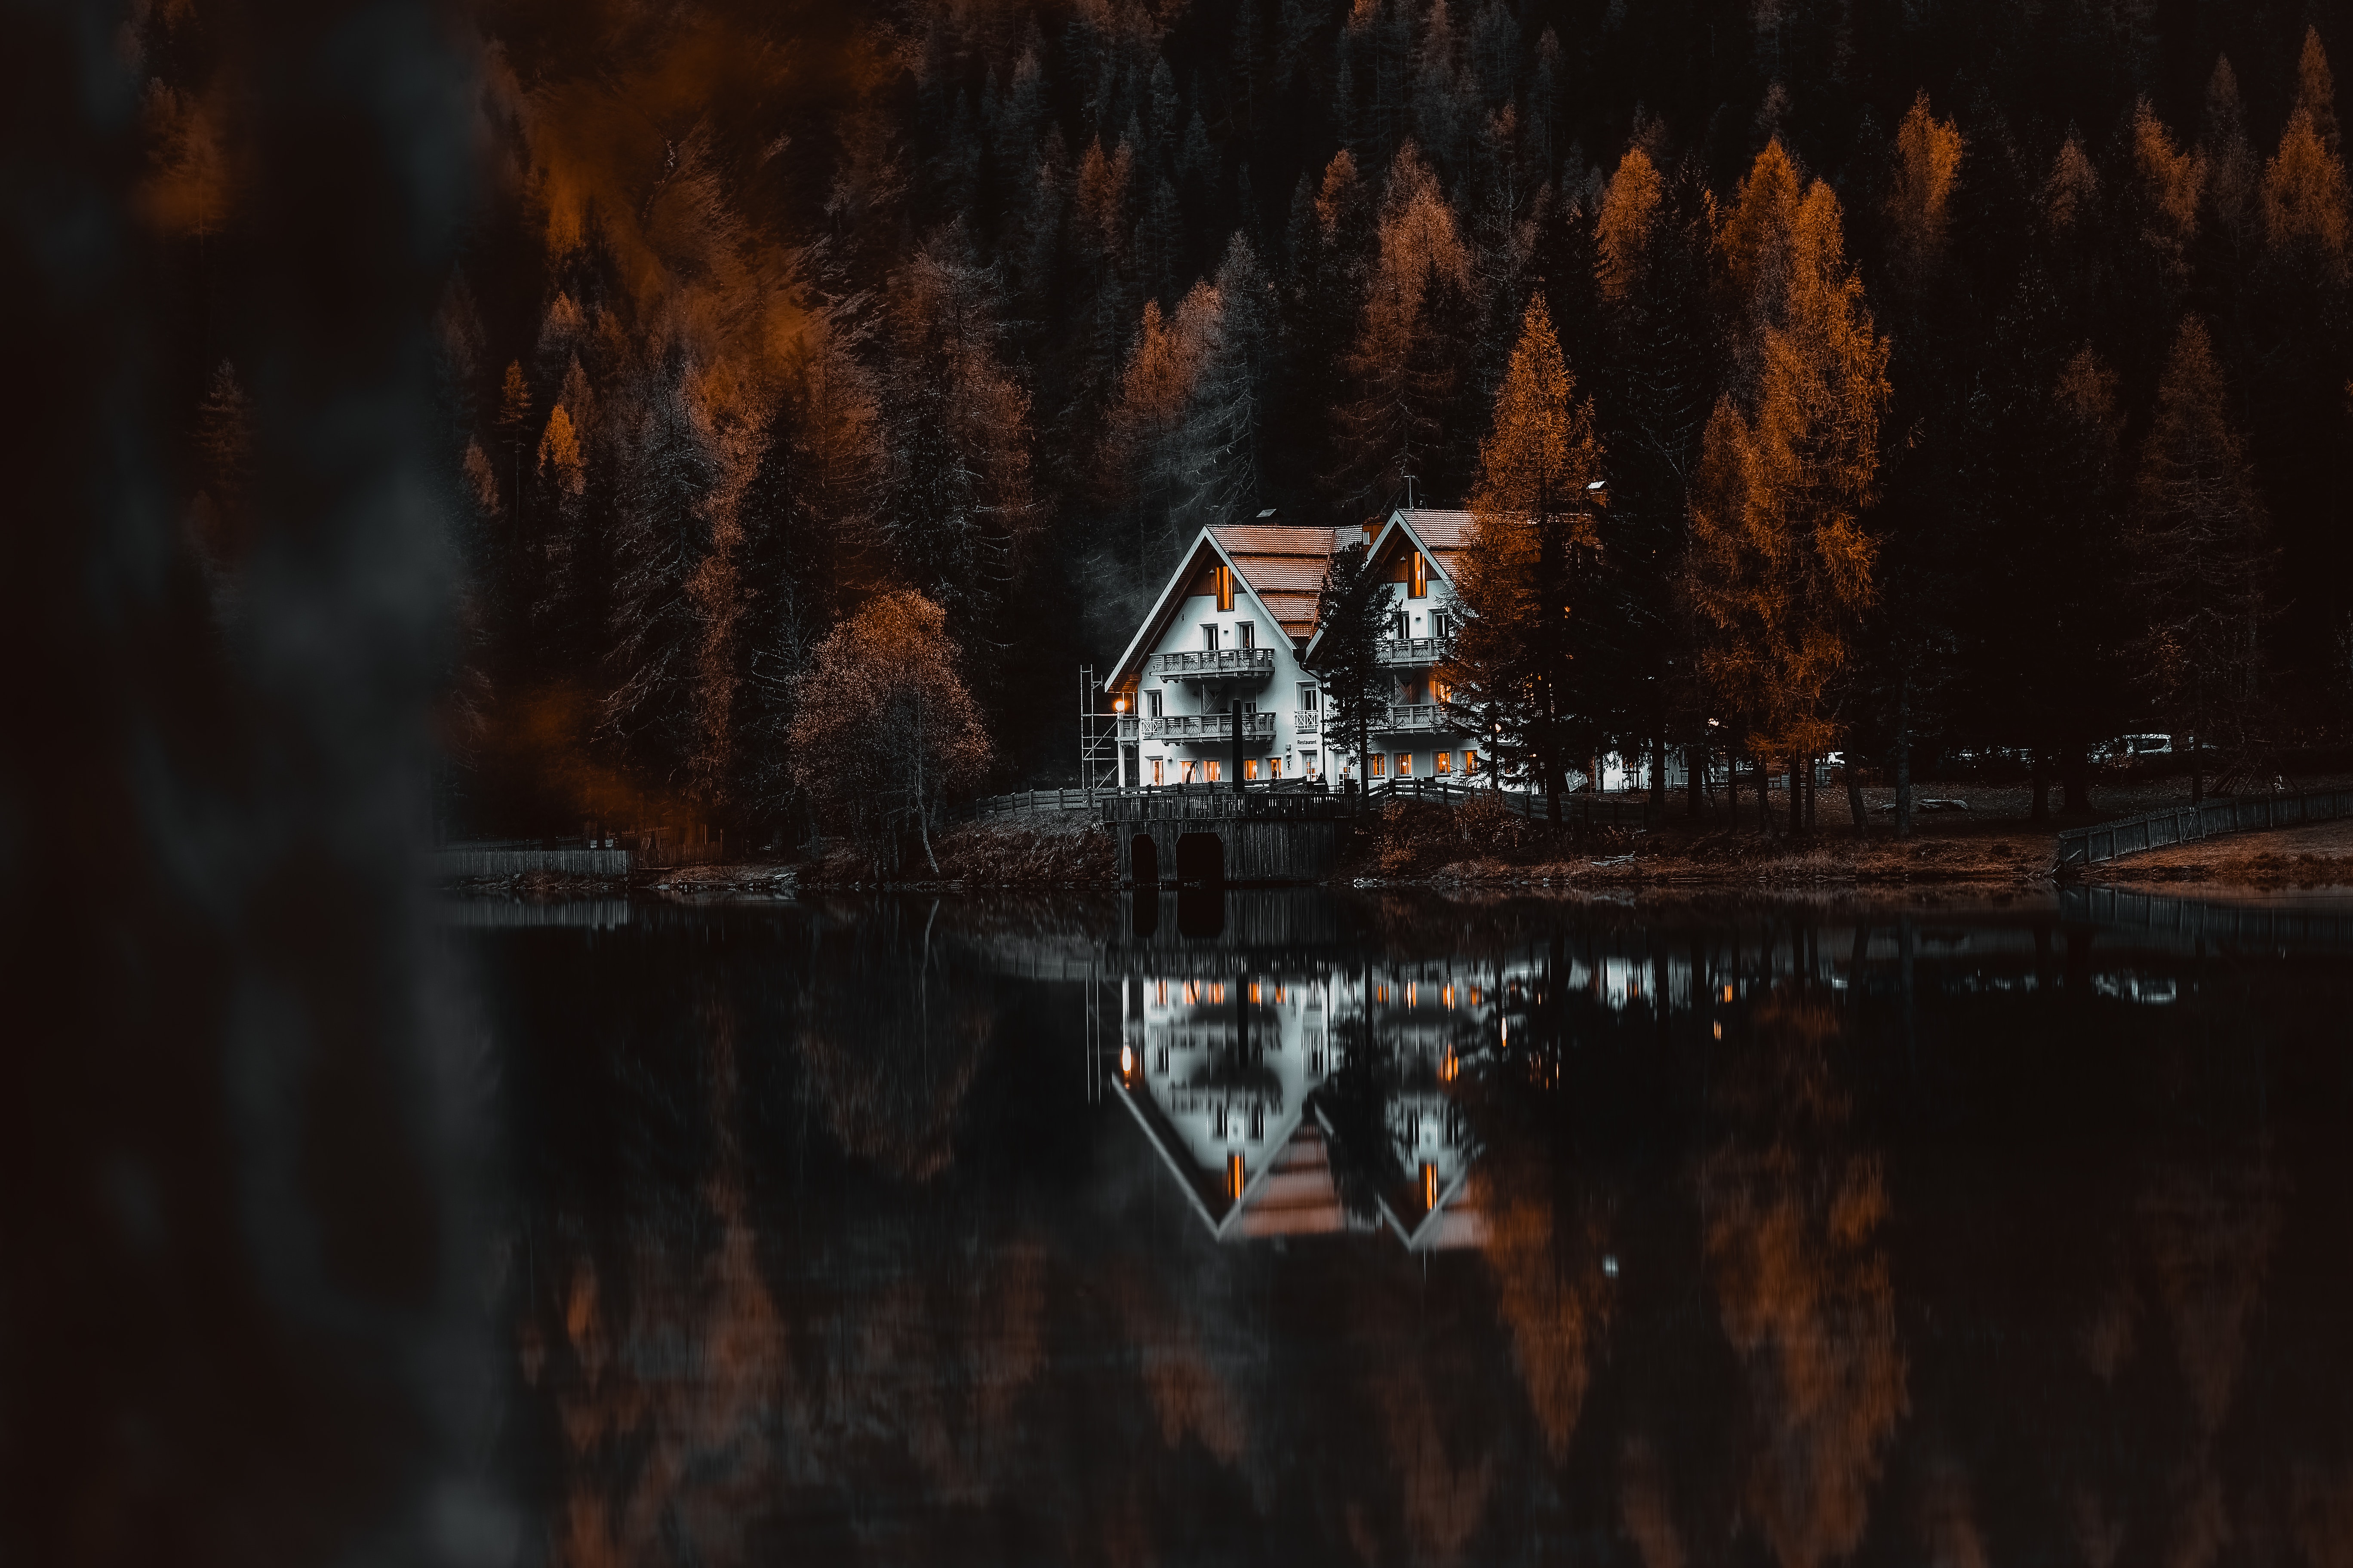 houses, lake, shore, small houses, forest, nature, bank